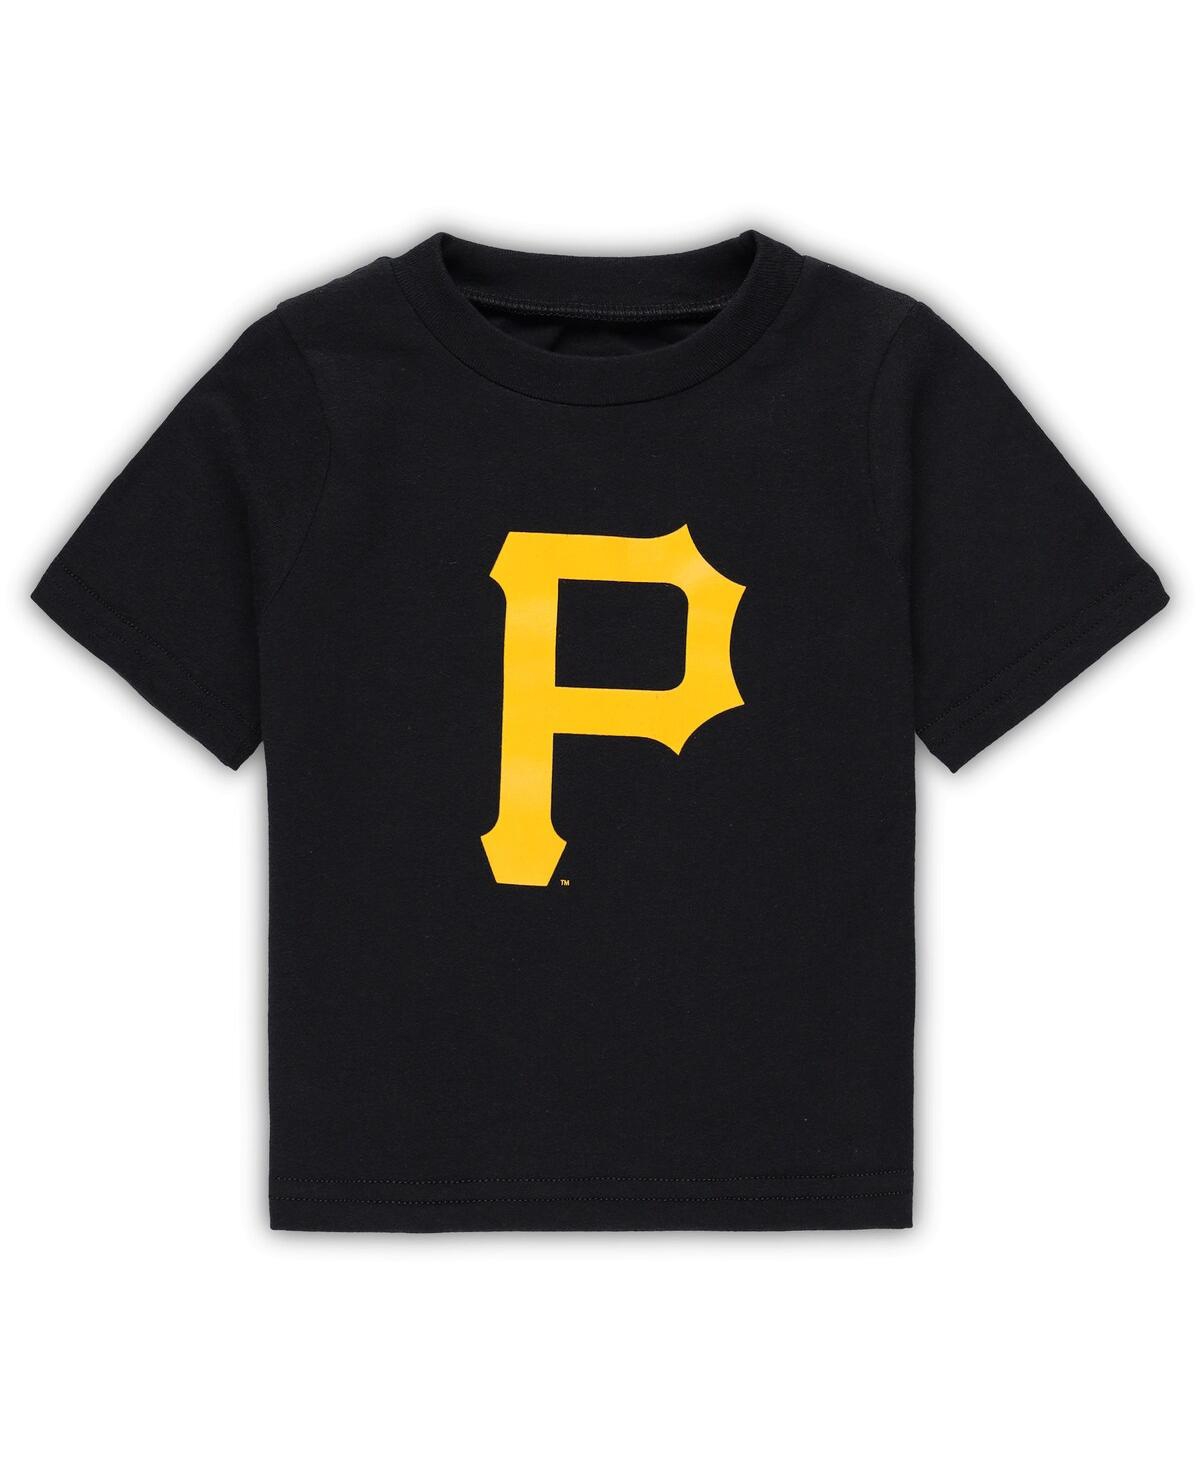 OUTERSTUFF INFANT BOYS AND GIRLS BLACK PITTSBURGH PIRATES TEAM CREW PRIMARY LOGO T-SHIRT